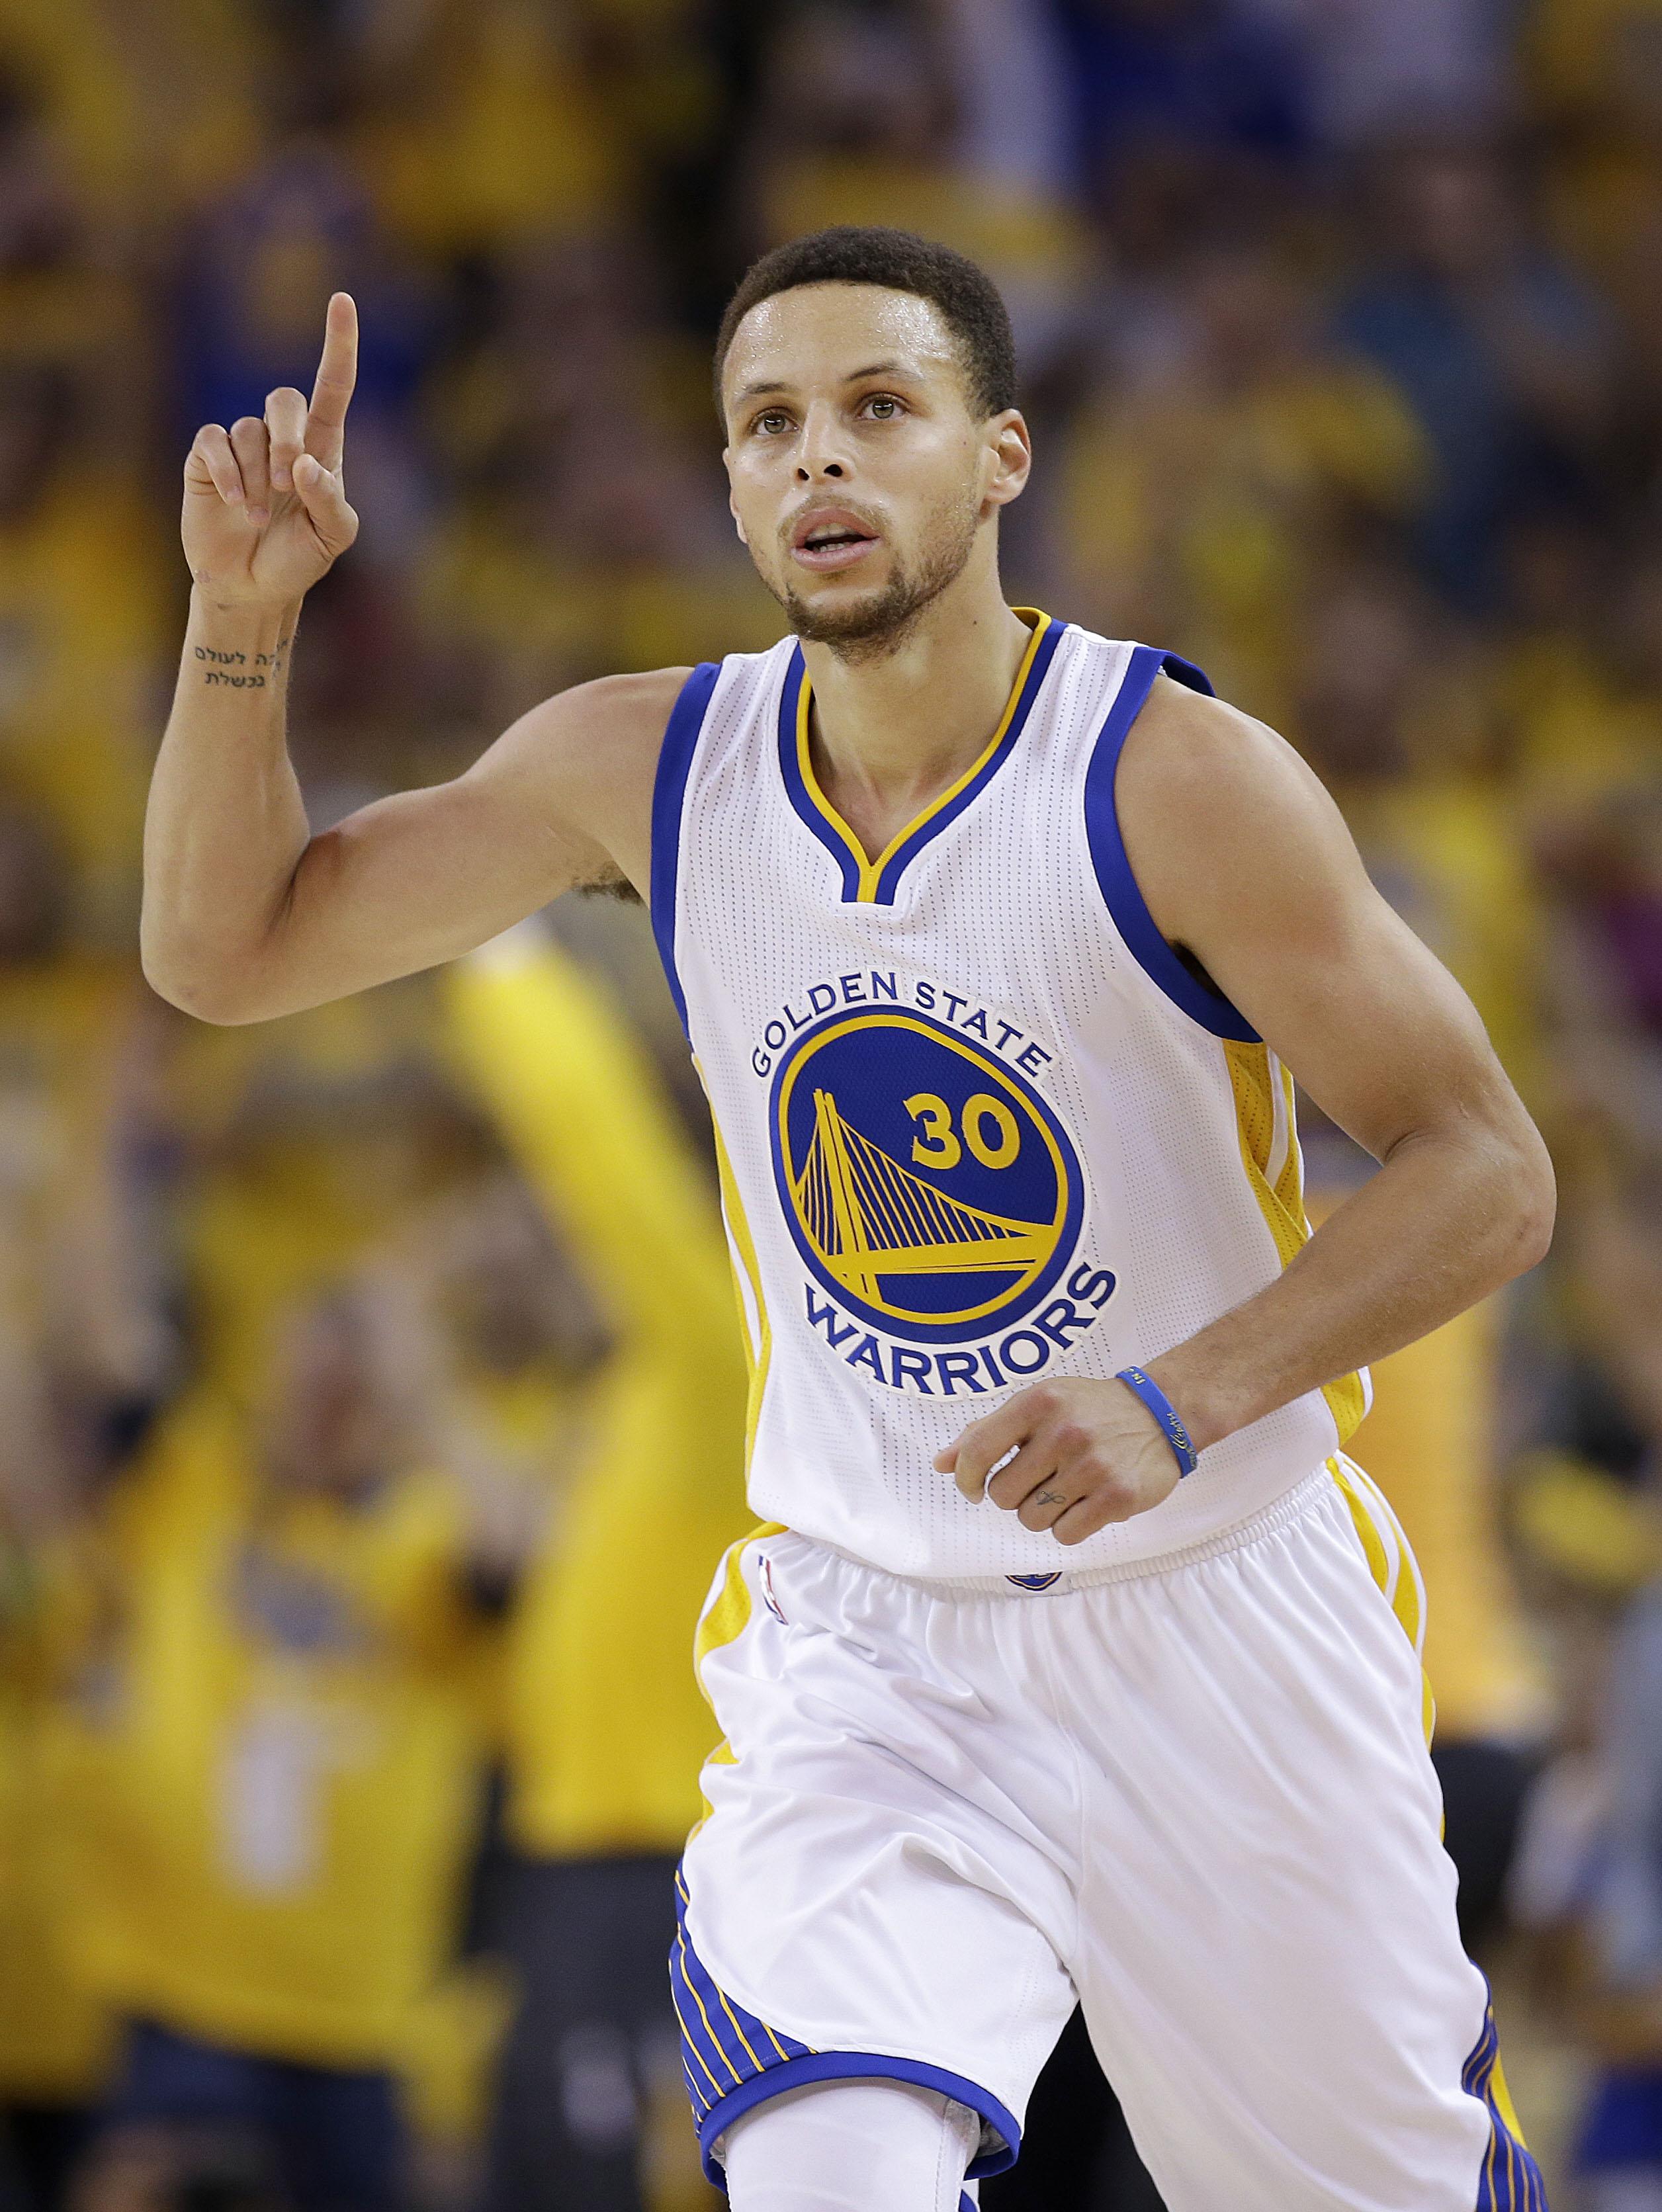 Healthy again at last, MVP Stephen Curry chases second title | The Spokesman-Review